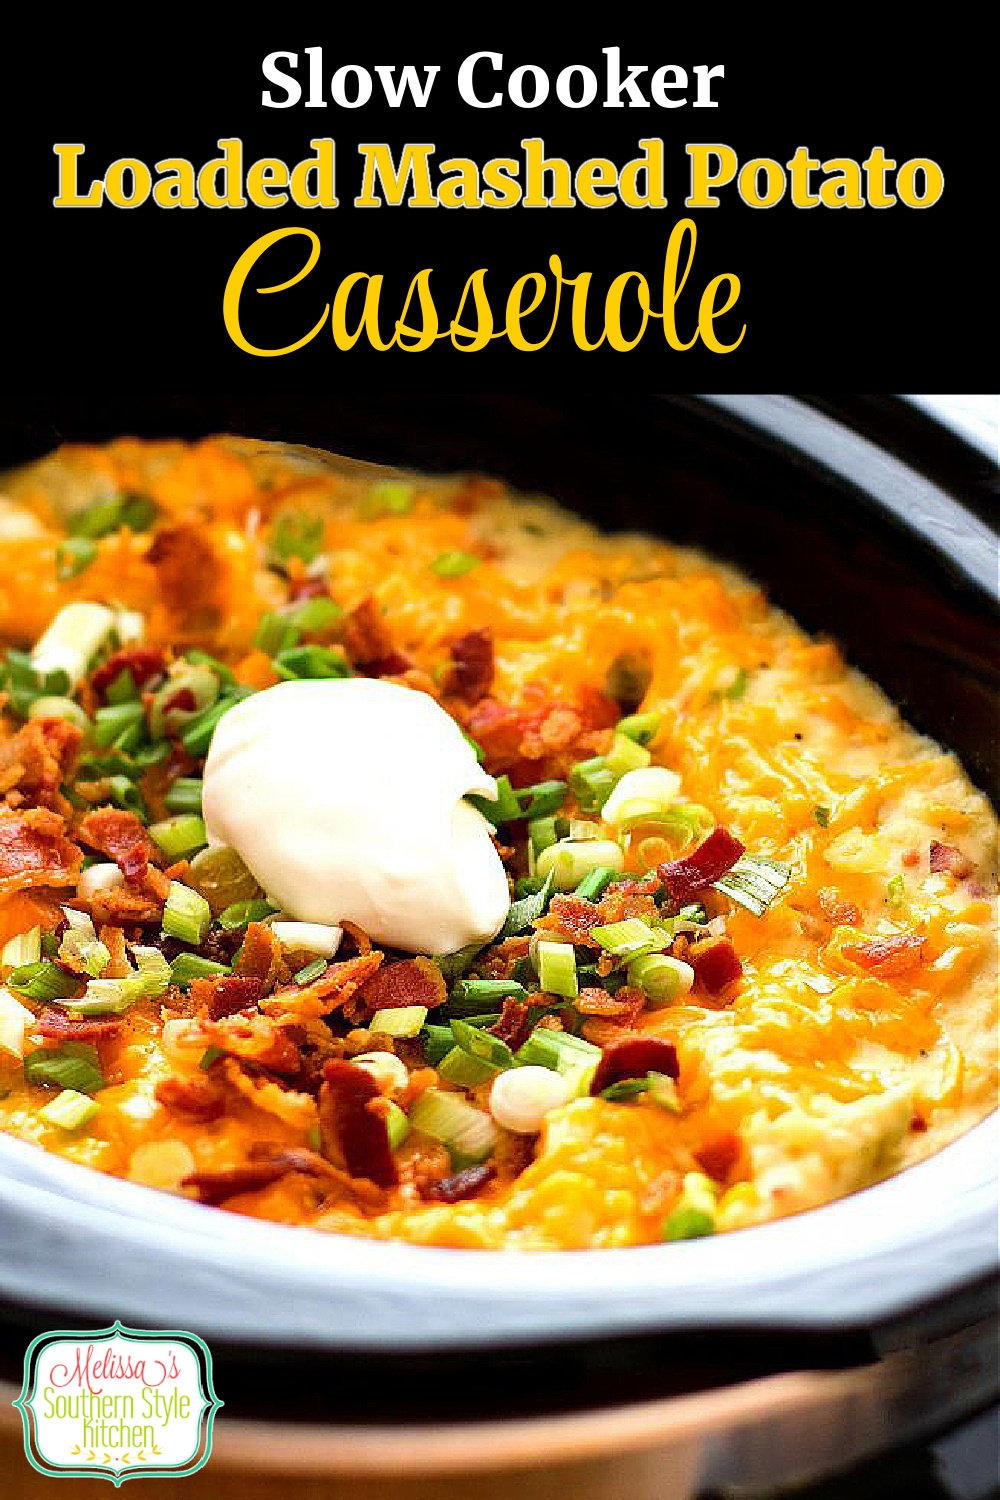 Make this Slow Cooker Loaded Mashed Potato Casserole in a snap #mashedpotatoes #crockpotpotatoes #slowcookedmashedpotatoes #potatorecipes #comfortfood #southernrecipes #southernfood #crockpotrecipes #sidedish #dinnerideas #slowcooked #bacon via @melissasssk